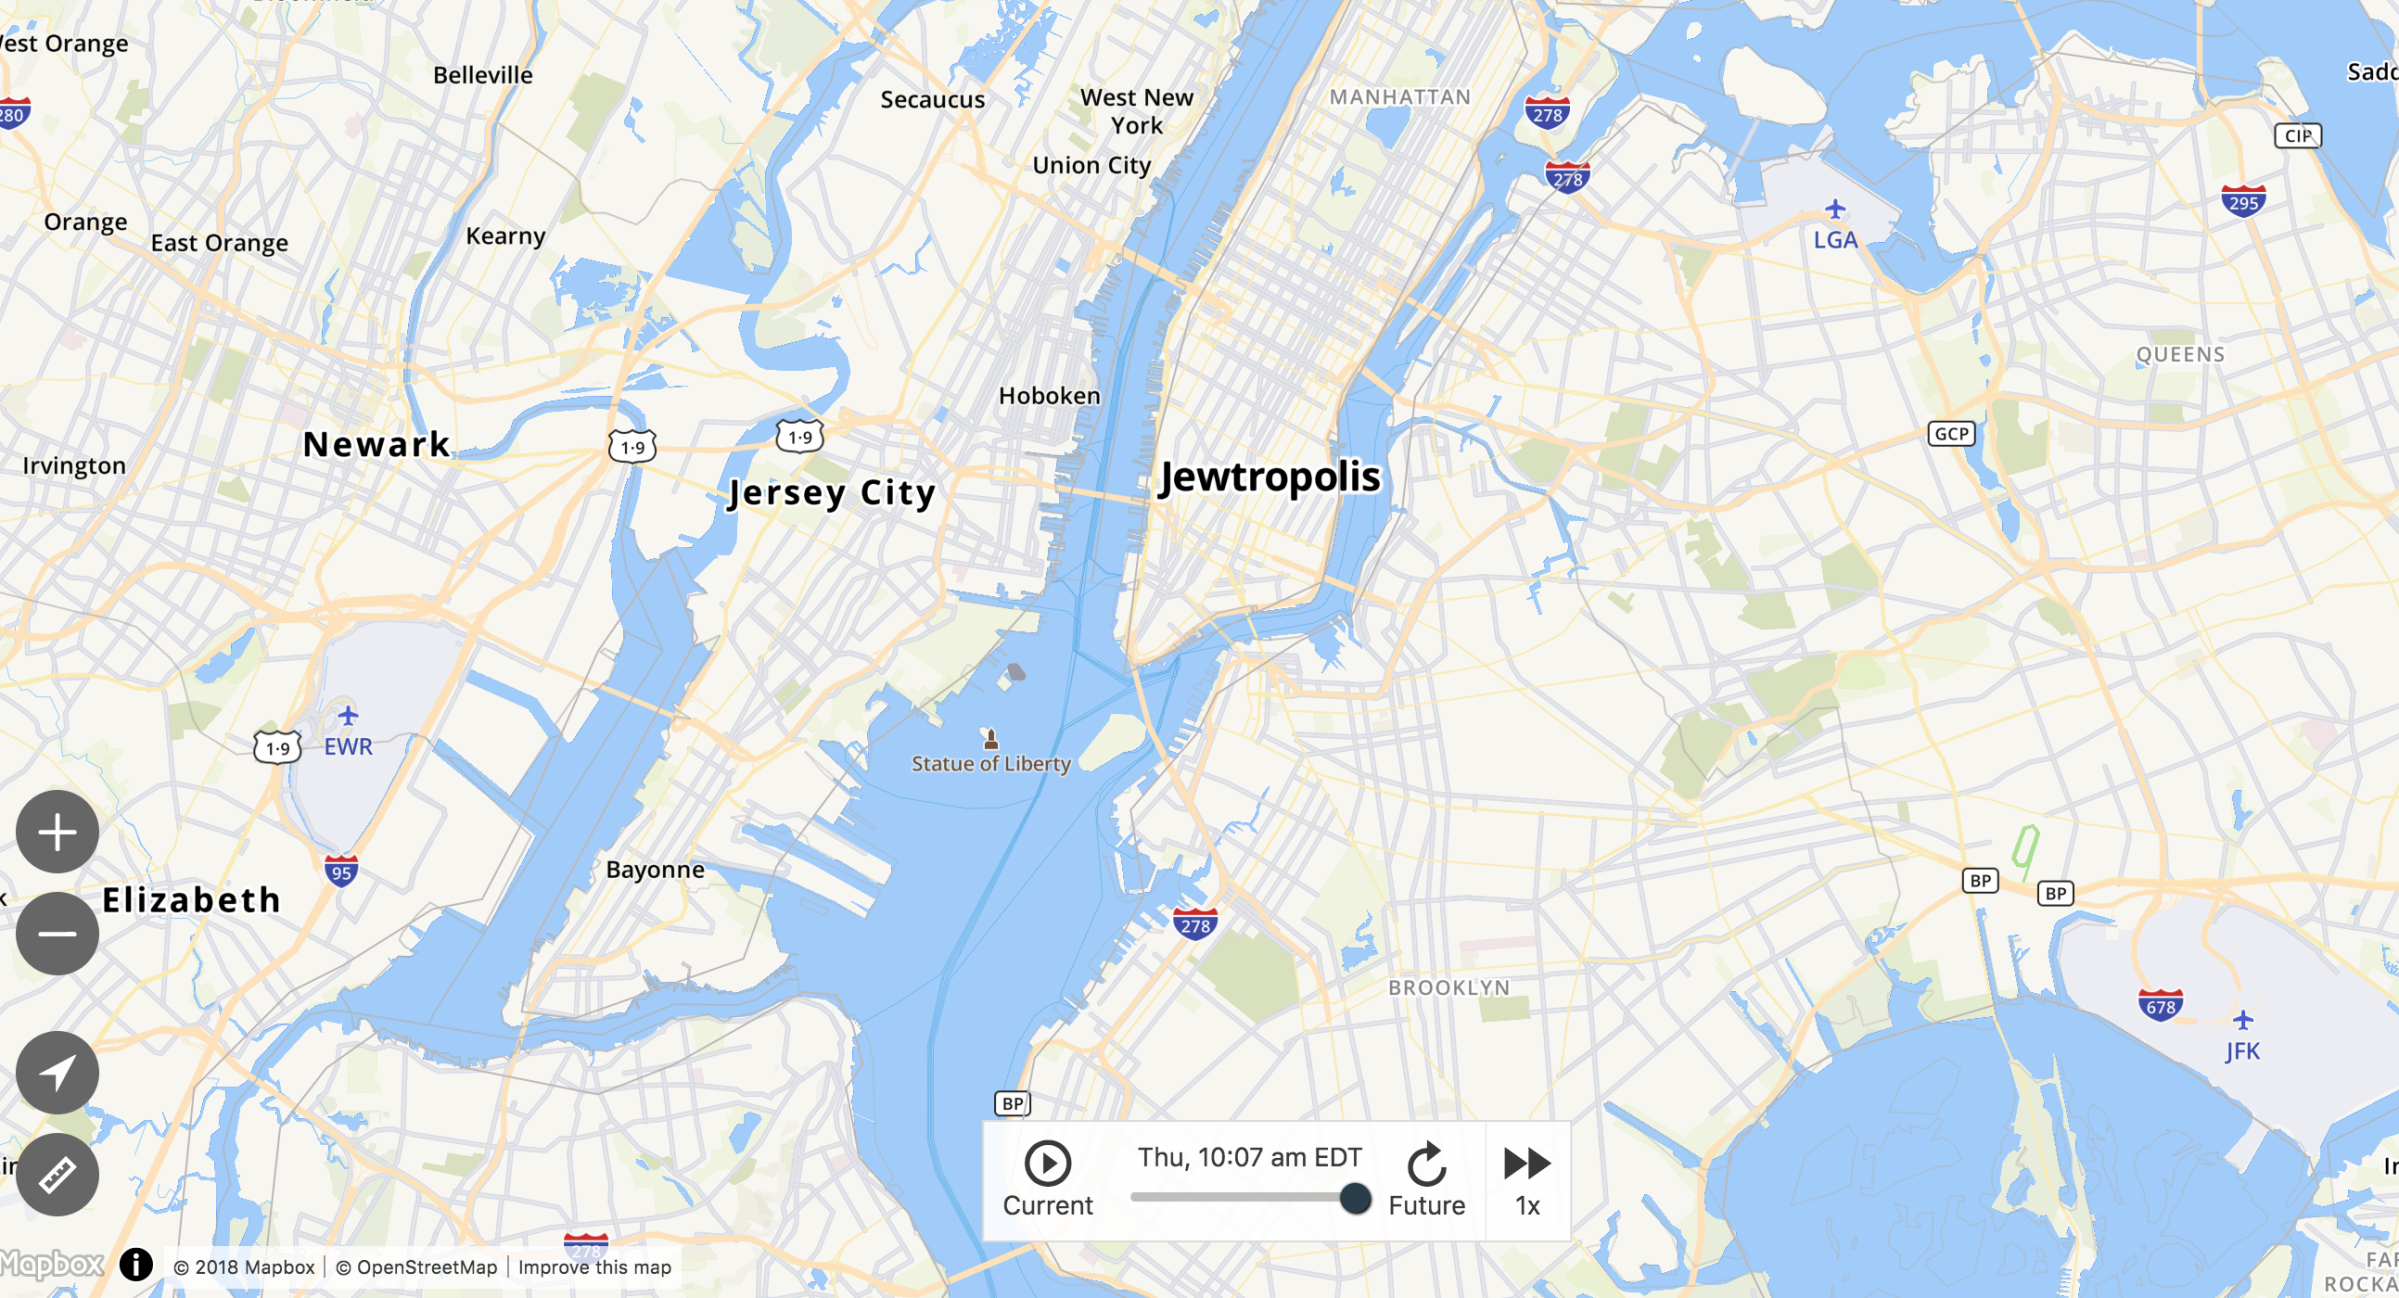 Mapbox-powered map from The Weather Channel